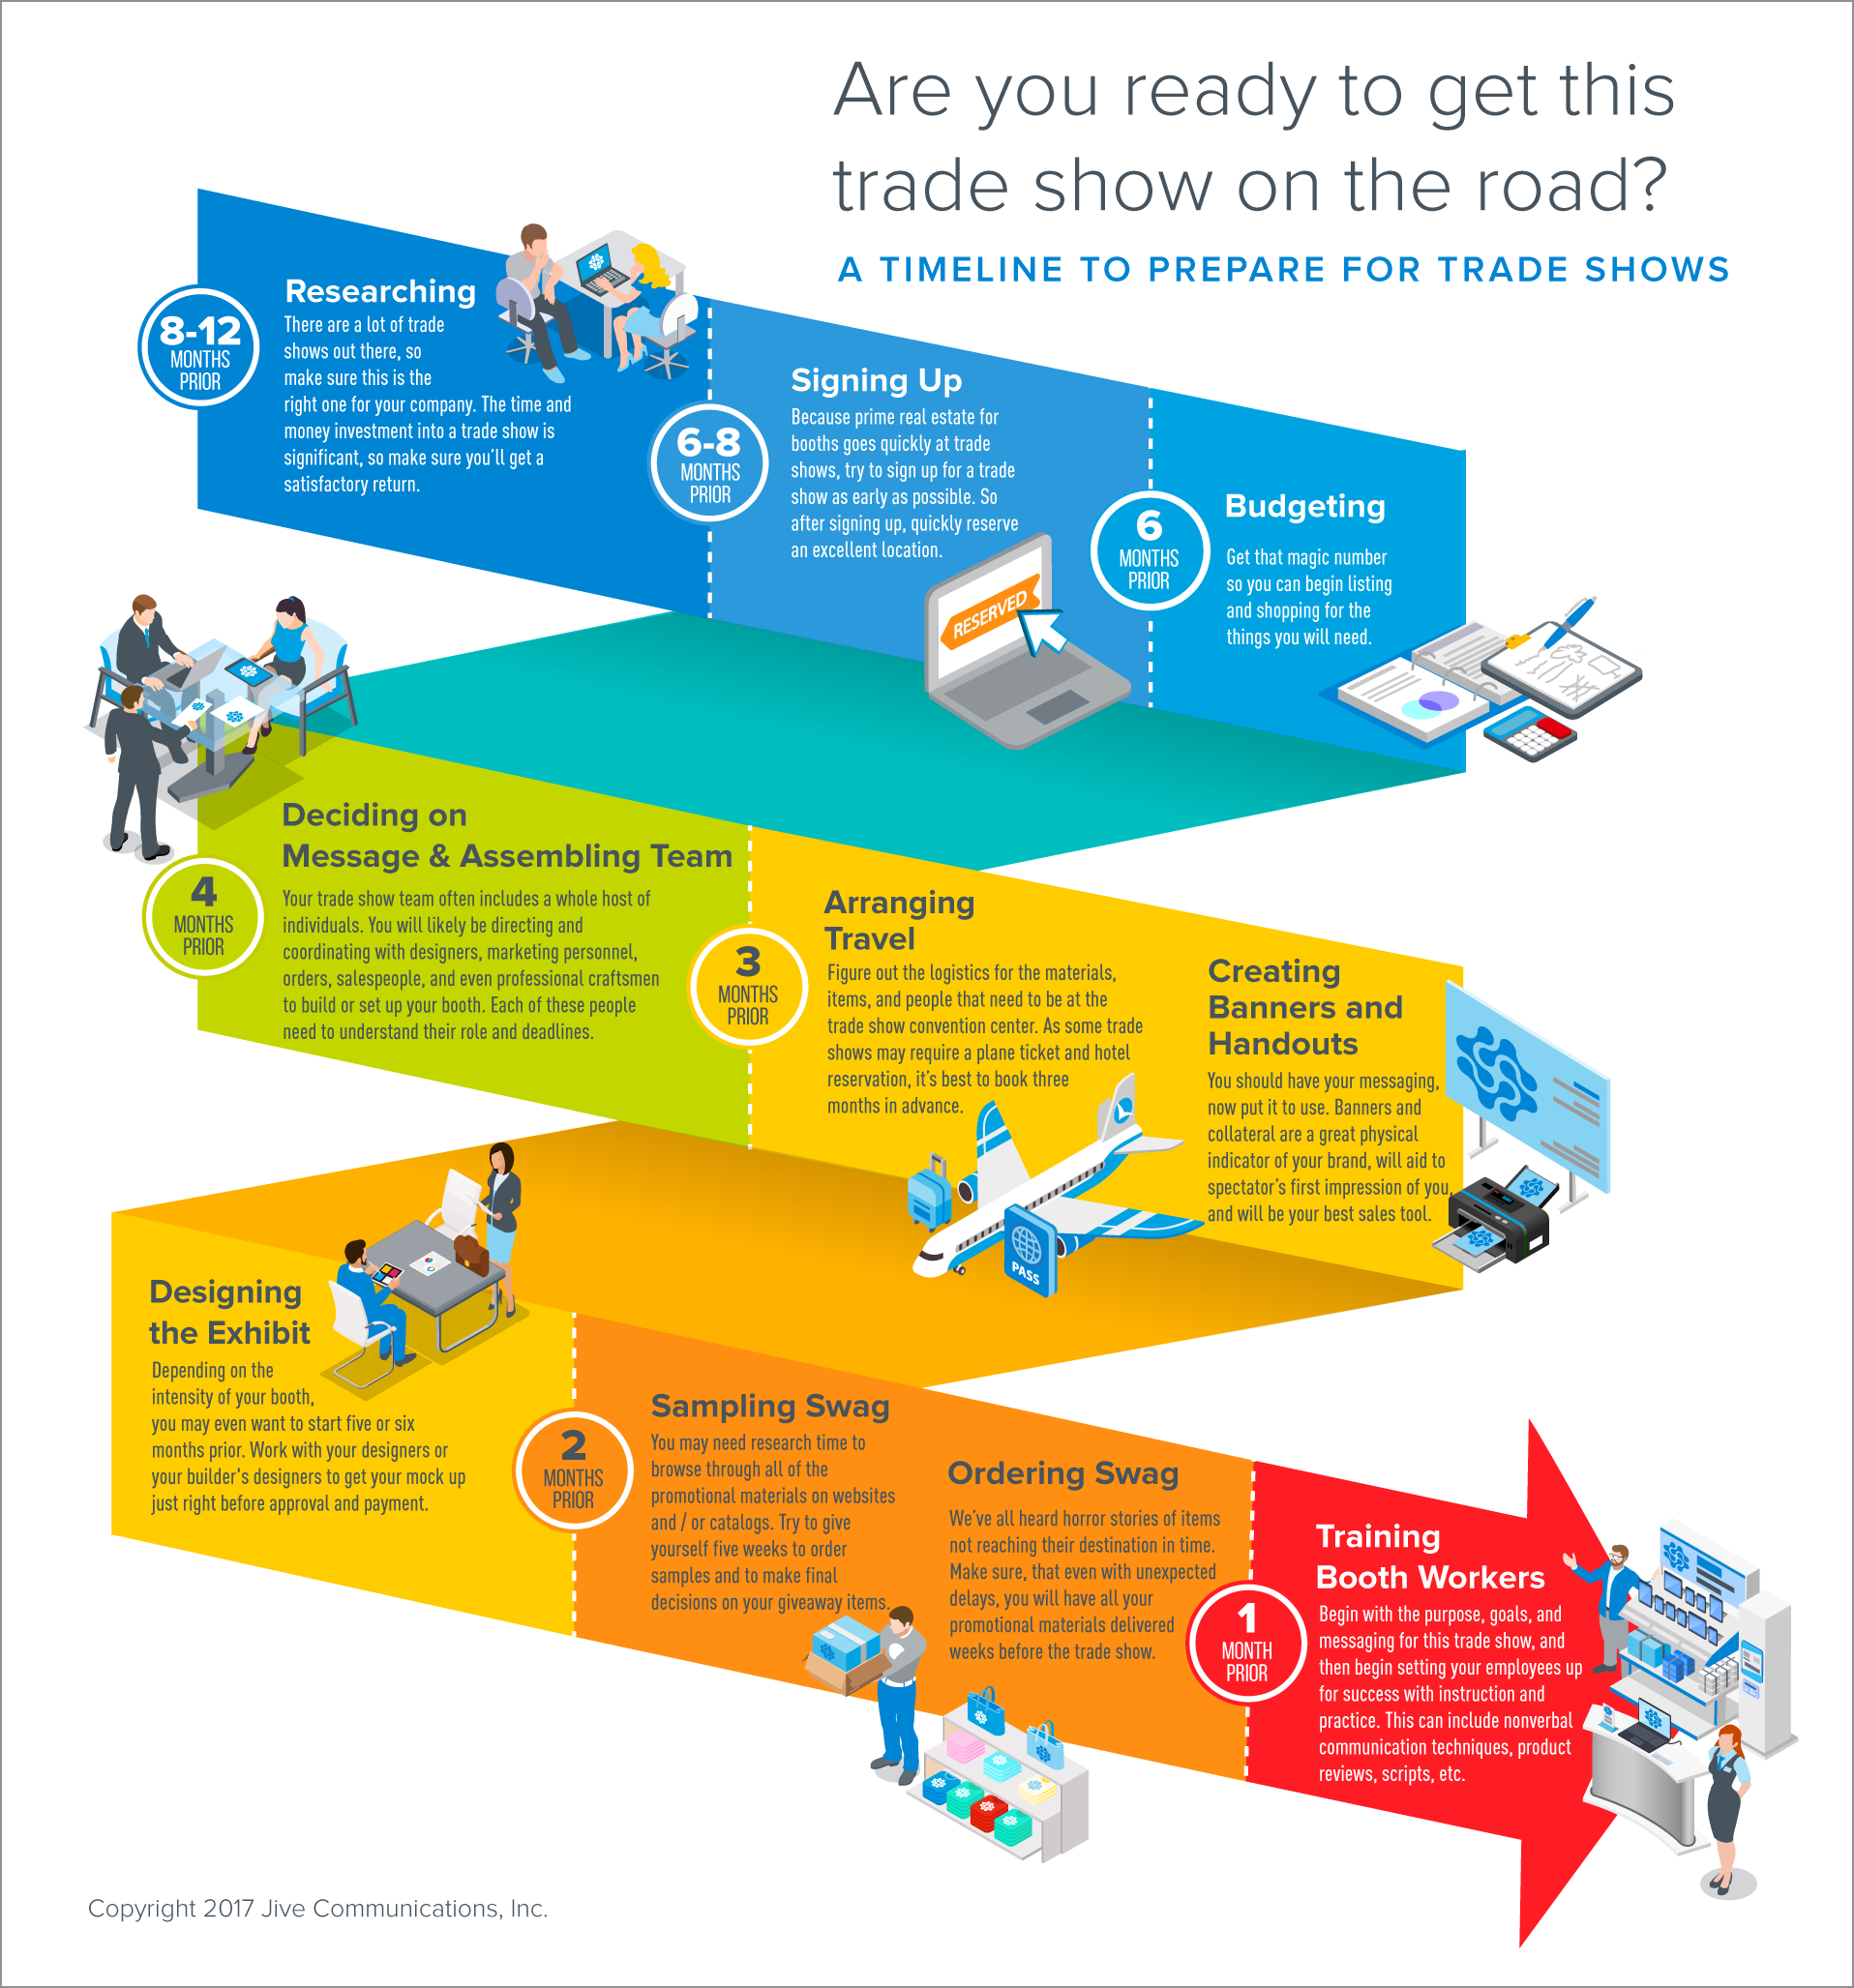 Trade Show Planning Timeline - Infographic